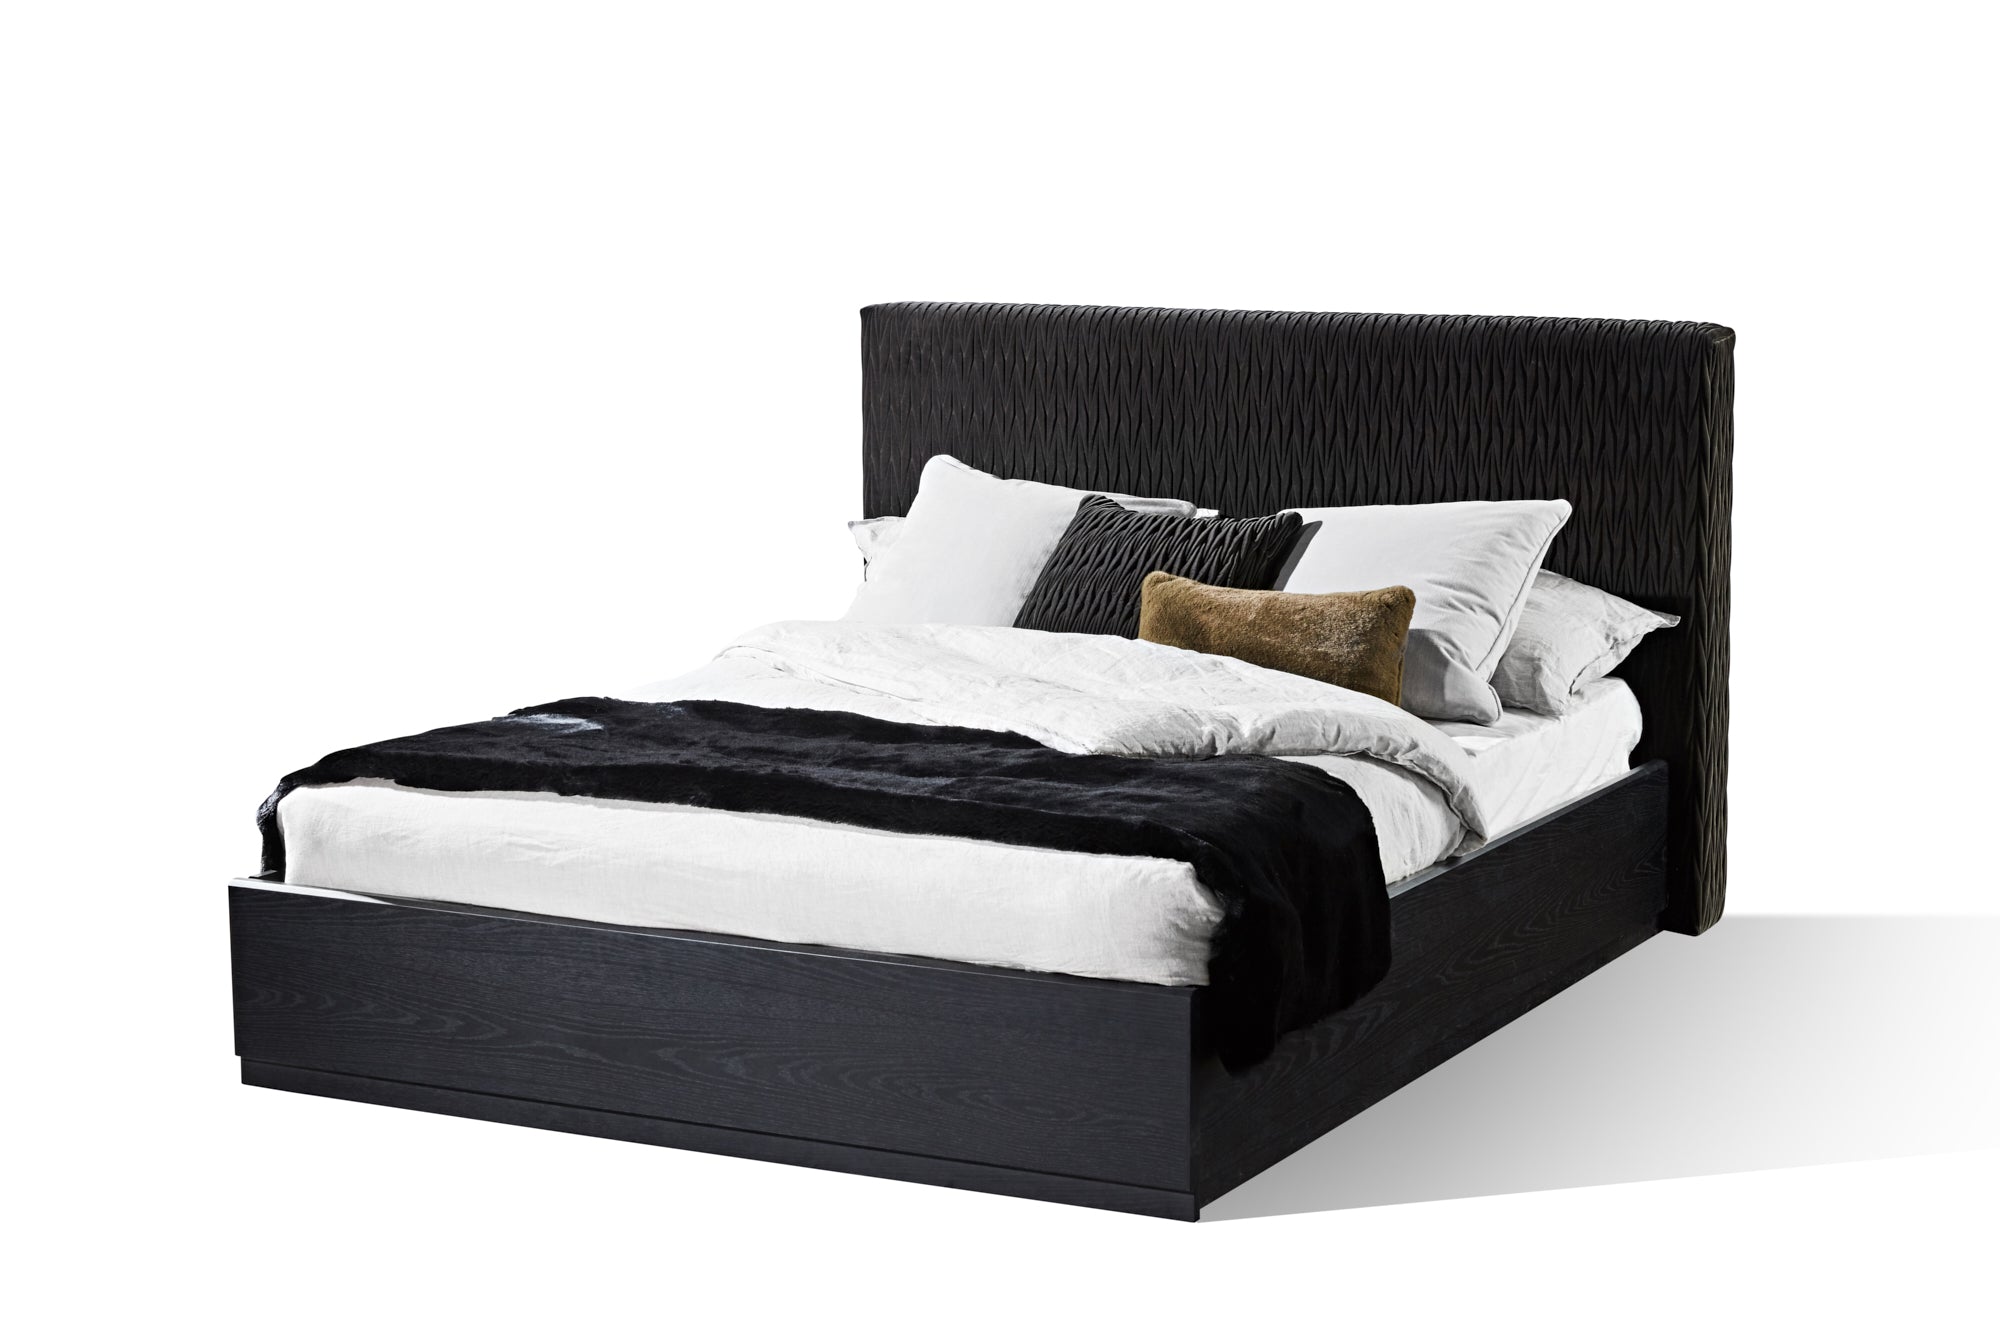 Profile Bed - Zuster Furniture